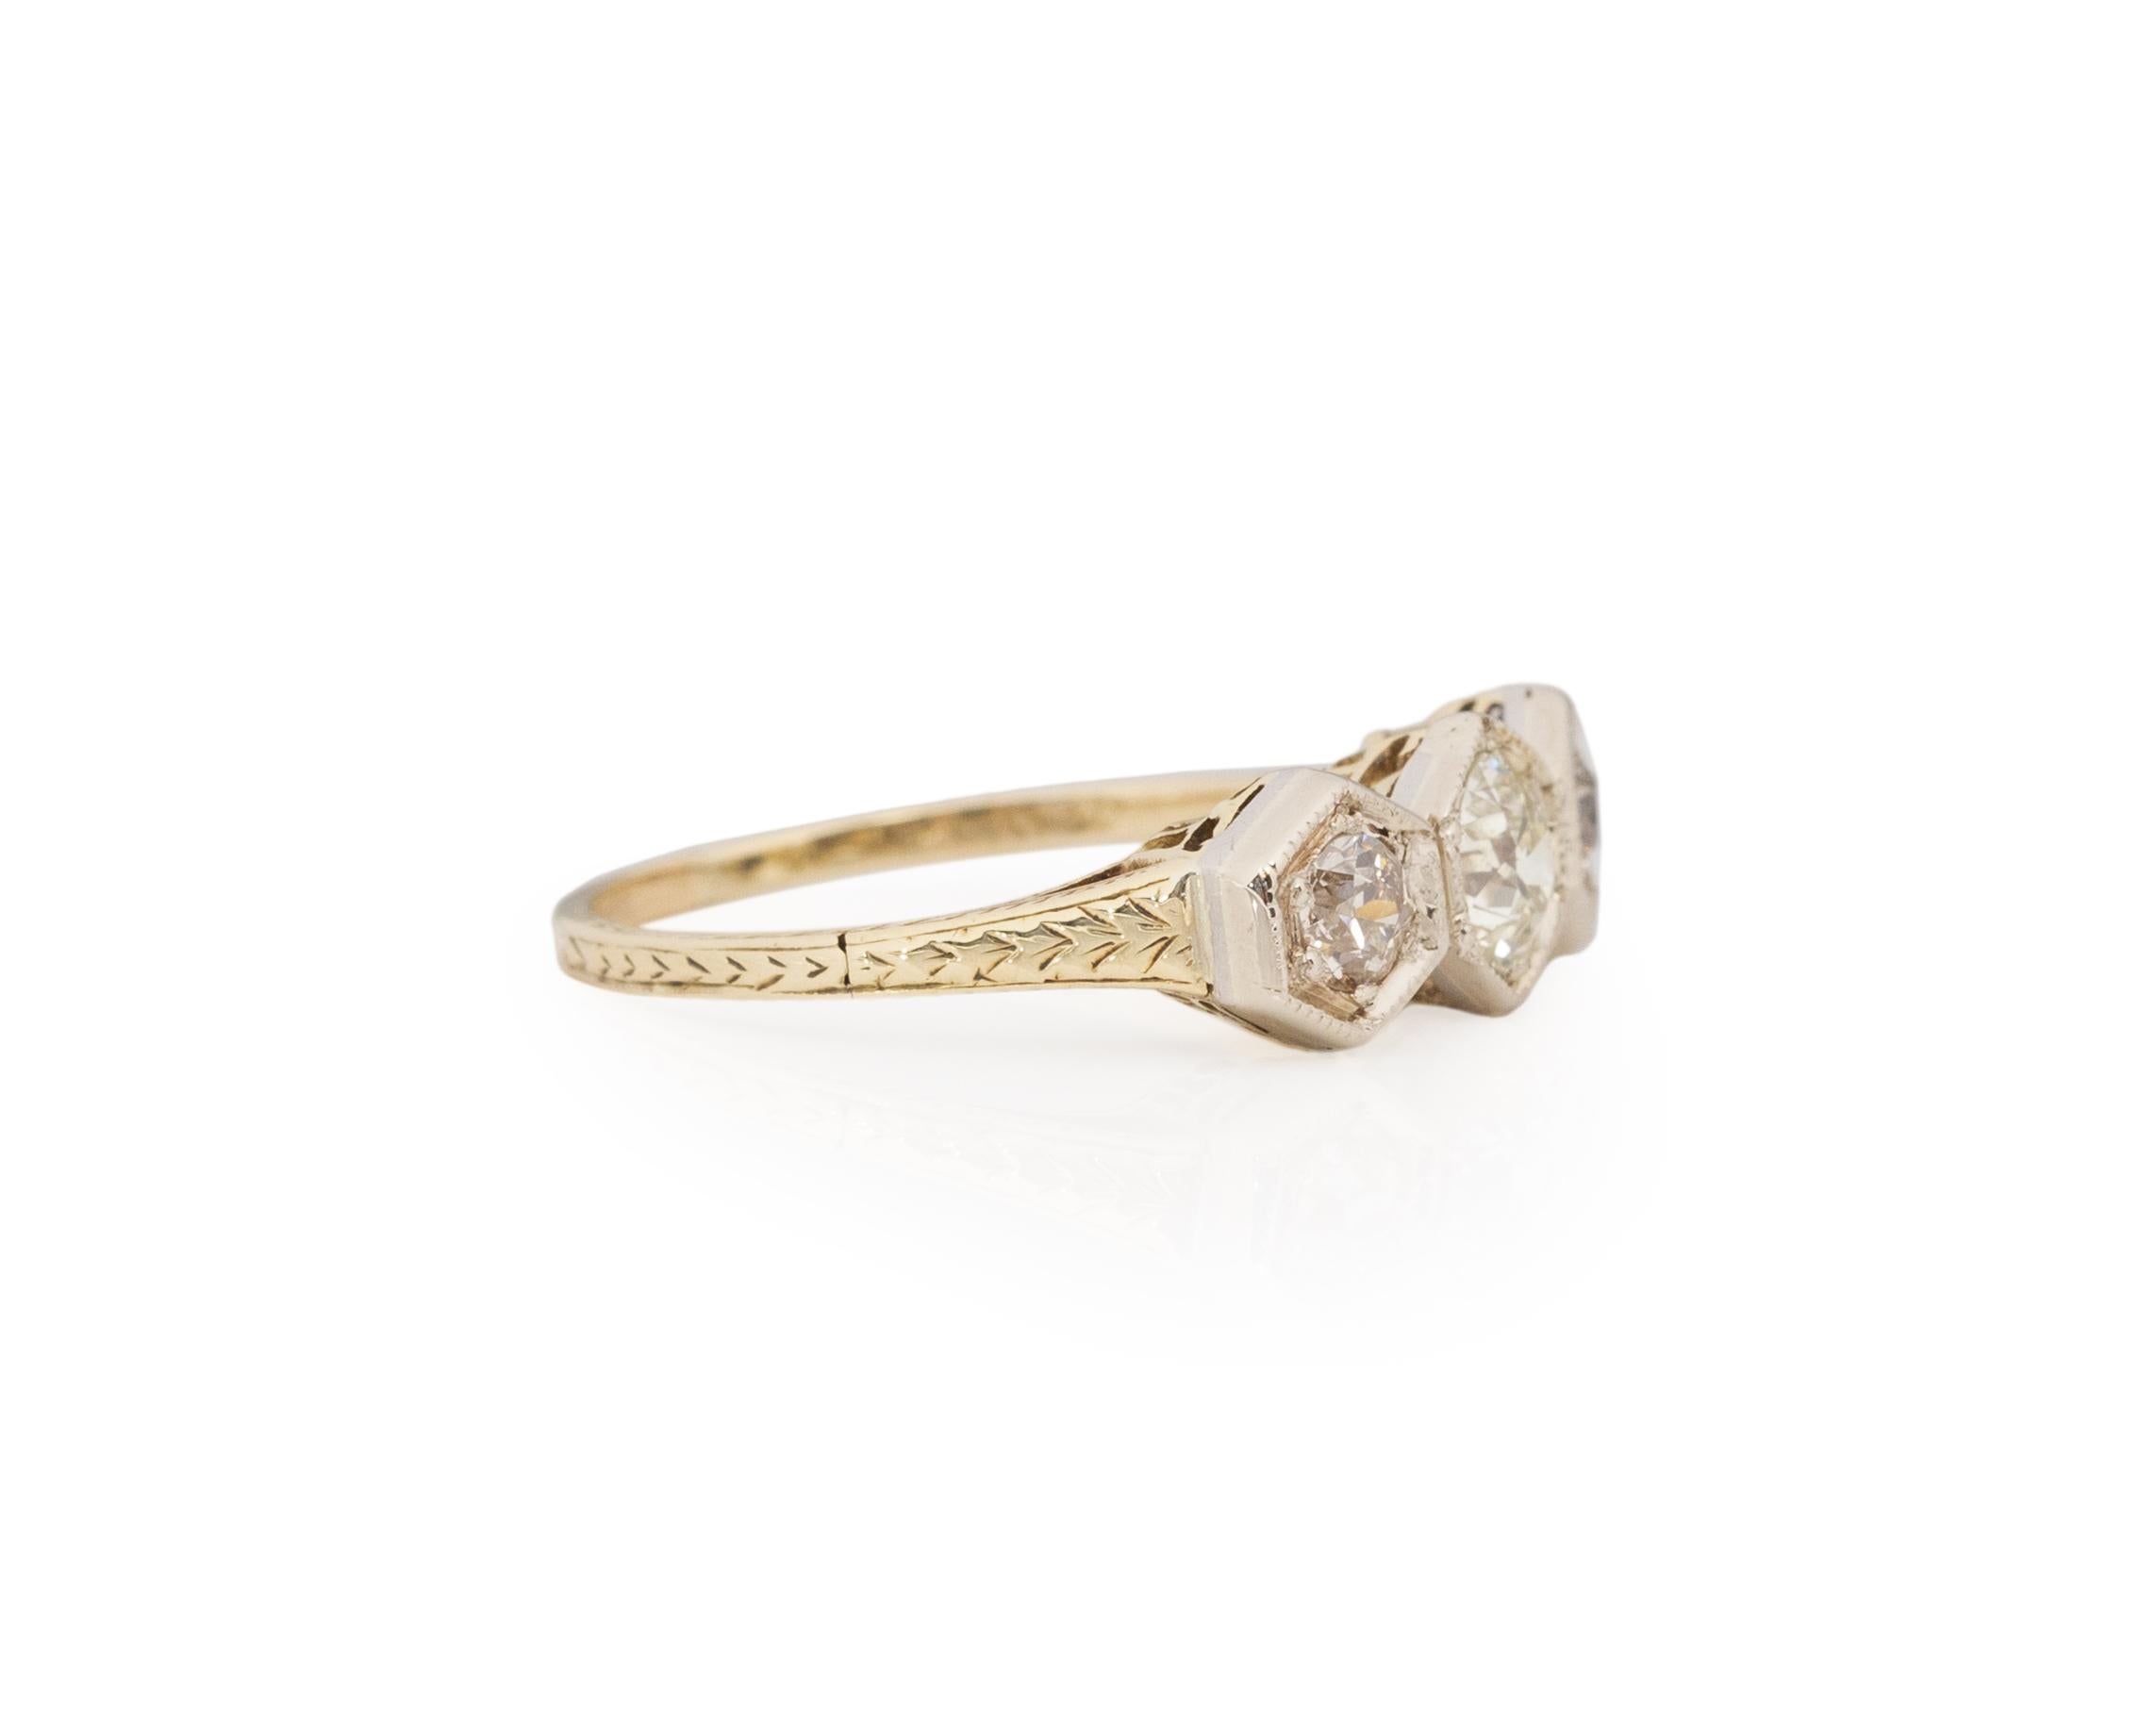 Ring Size: 6.5
Metal Type: 14K Yellow Gold [Hallmarked, and Tested]
Weight: 2.5 grams

Diamond Details:
Weight: .77ct, total Weight
Cut: Old European brilliant
Color: Light Brown to Medium Brown
Clarity: SI

Finger to Top of Stone Measurement: